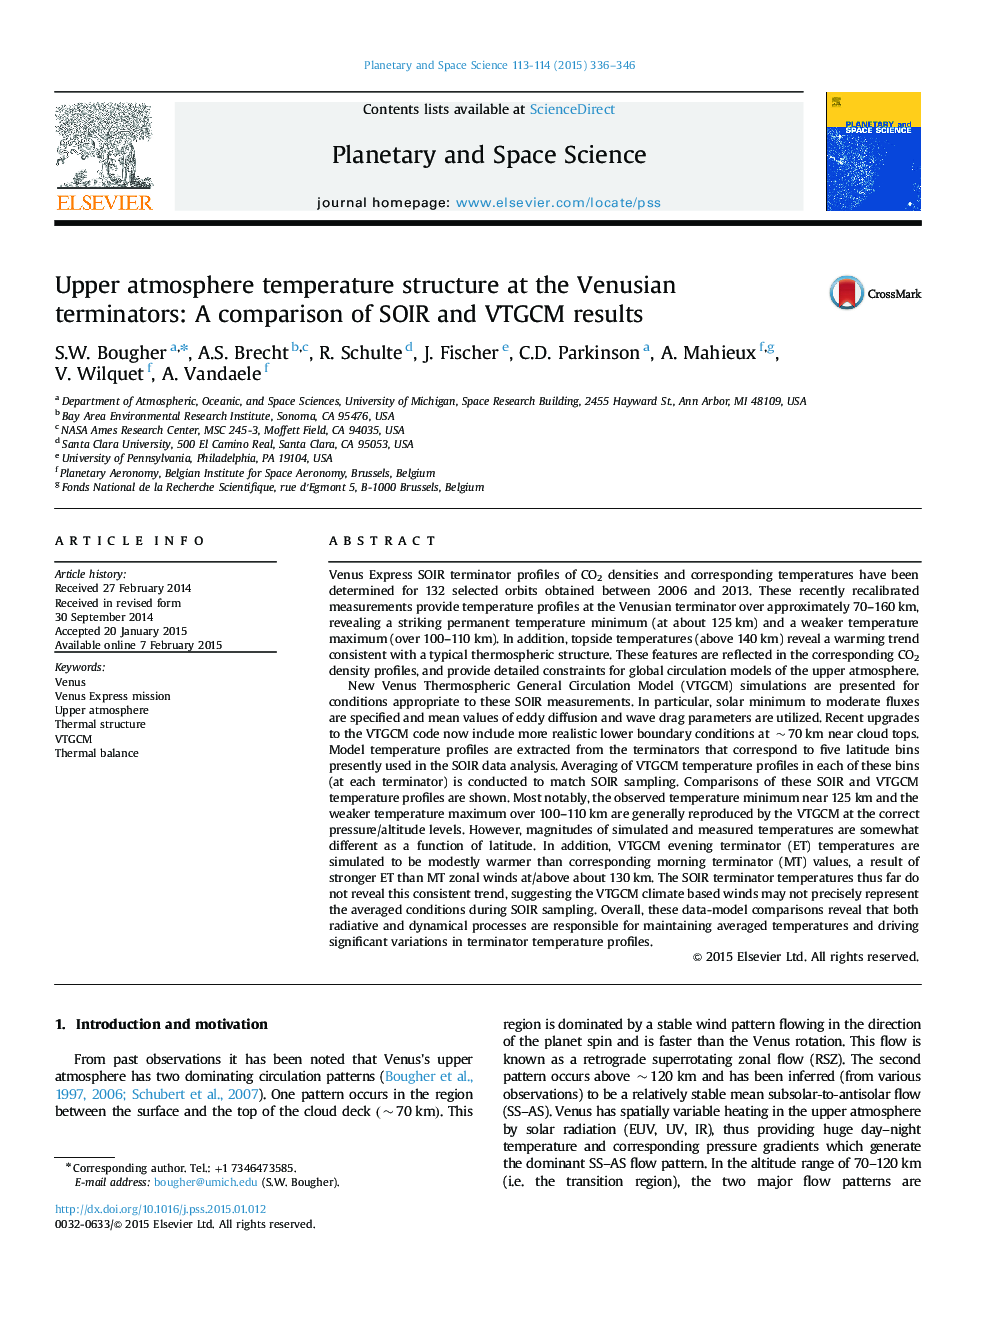 Upper atmosphere temperature structure at the Venusian terminators: A comparison of SOIR and VTGCM results